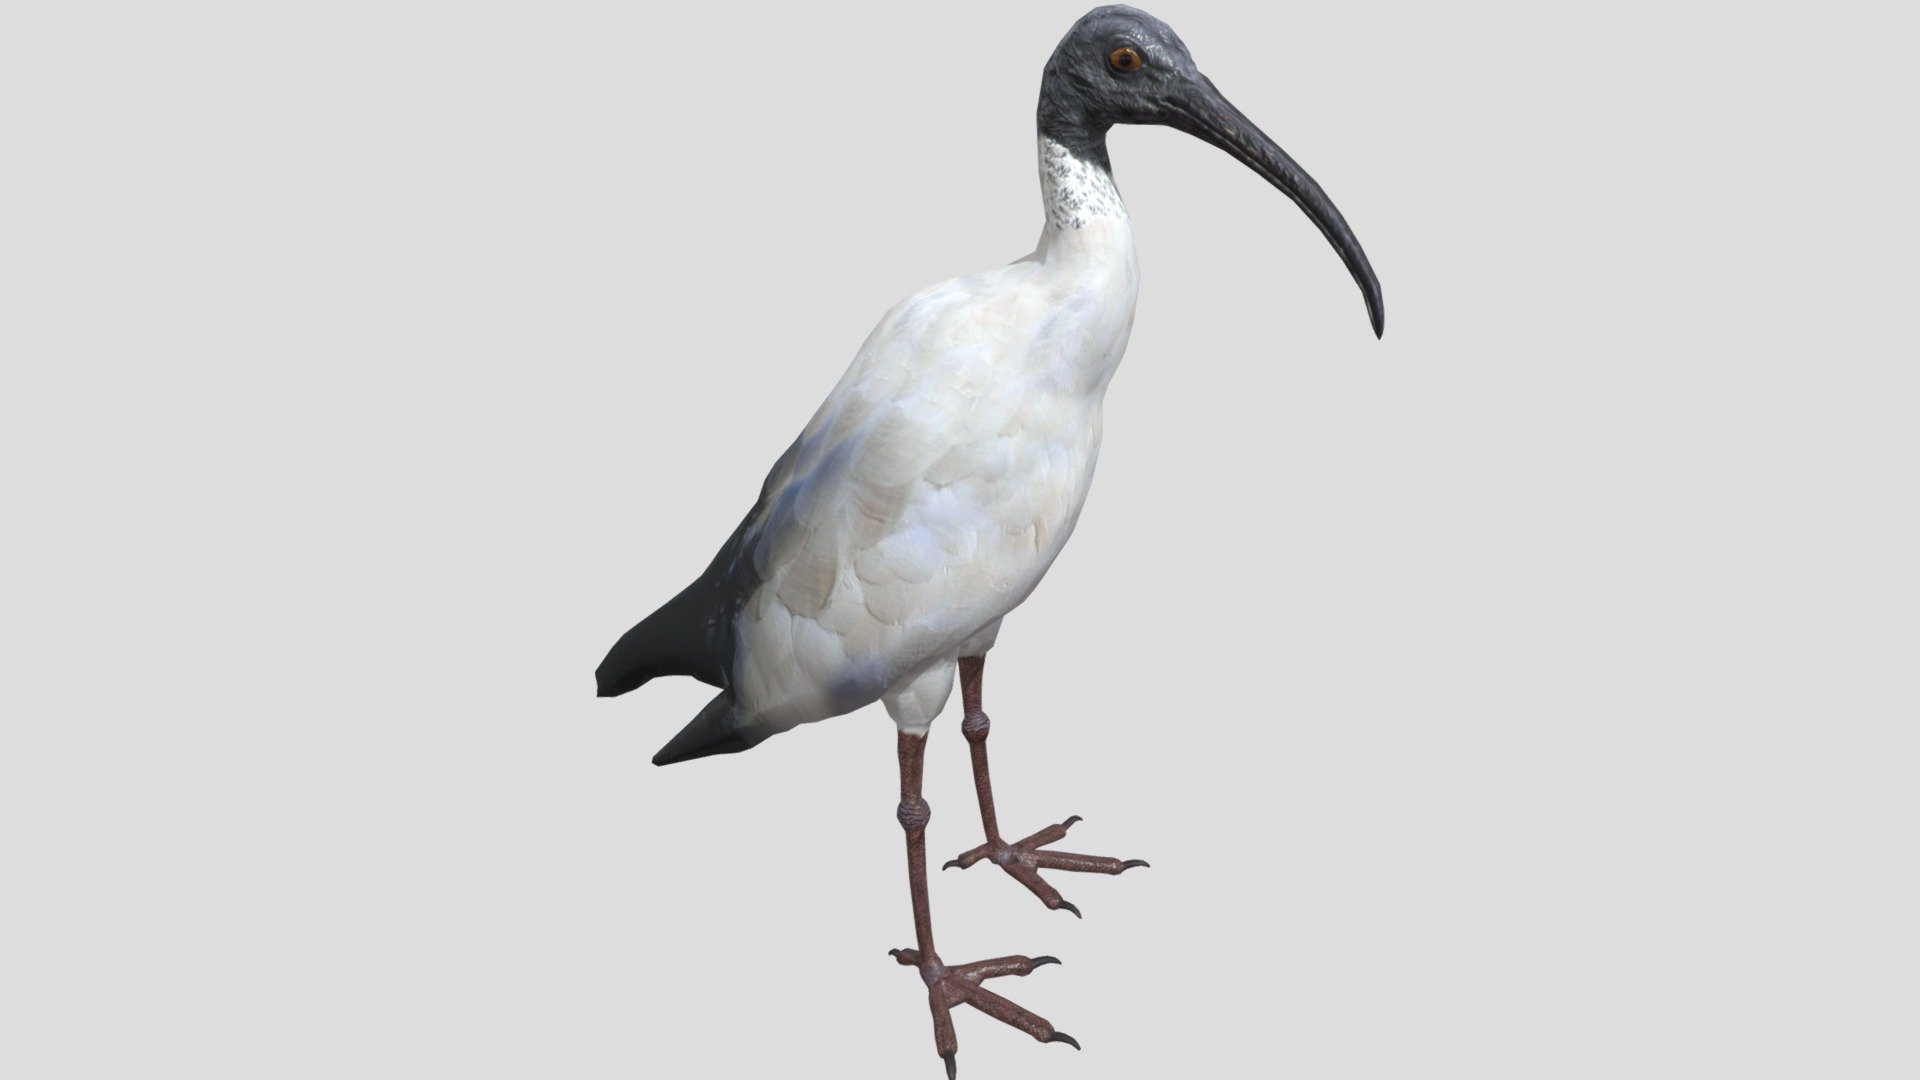 Digital 3d model of Australian Ibis

The product includes:

-The model is one single object

-All textures and materials are mapped in every format.

-Textures JPEG- color,normal and roughness maps

-Texture size 2048 x 2048 pxls.

-No special plugin needed to open scene 3d model